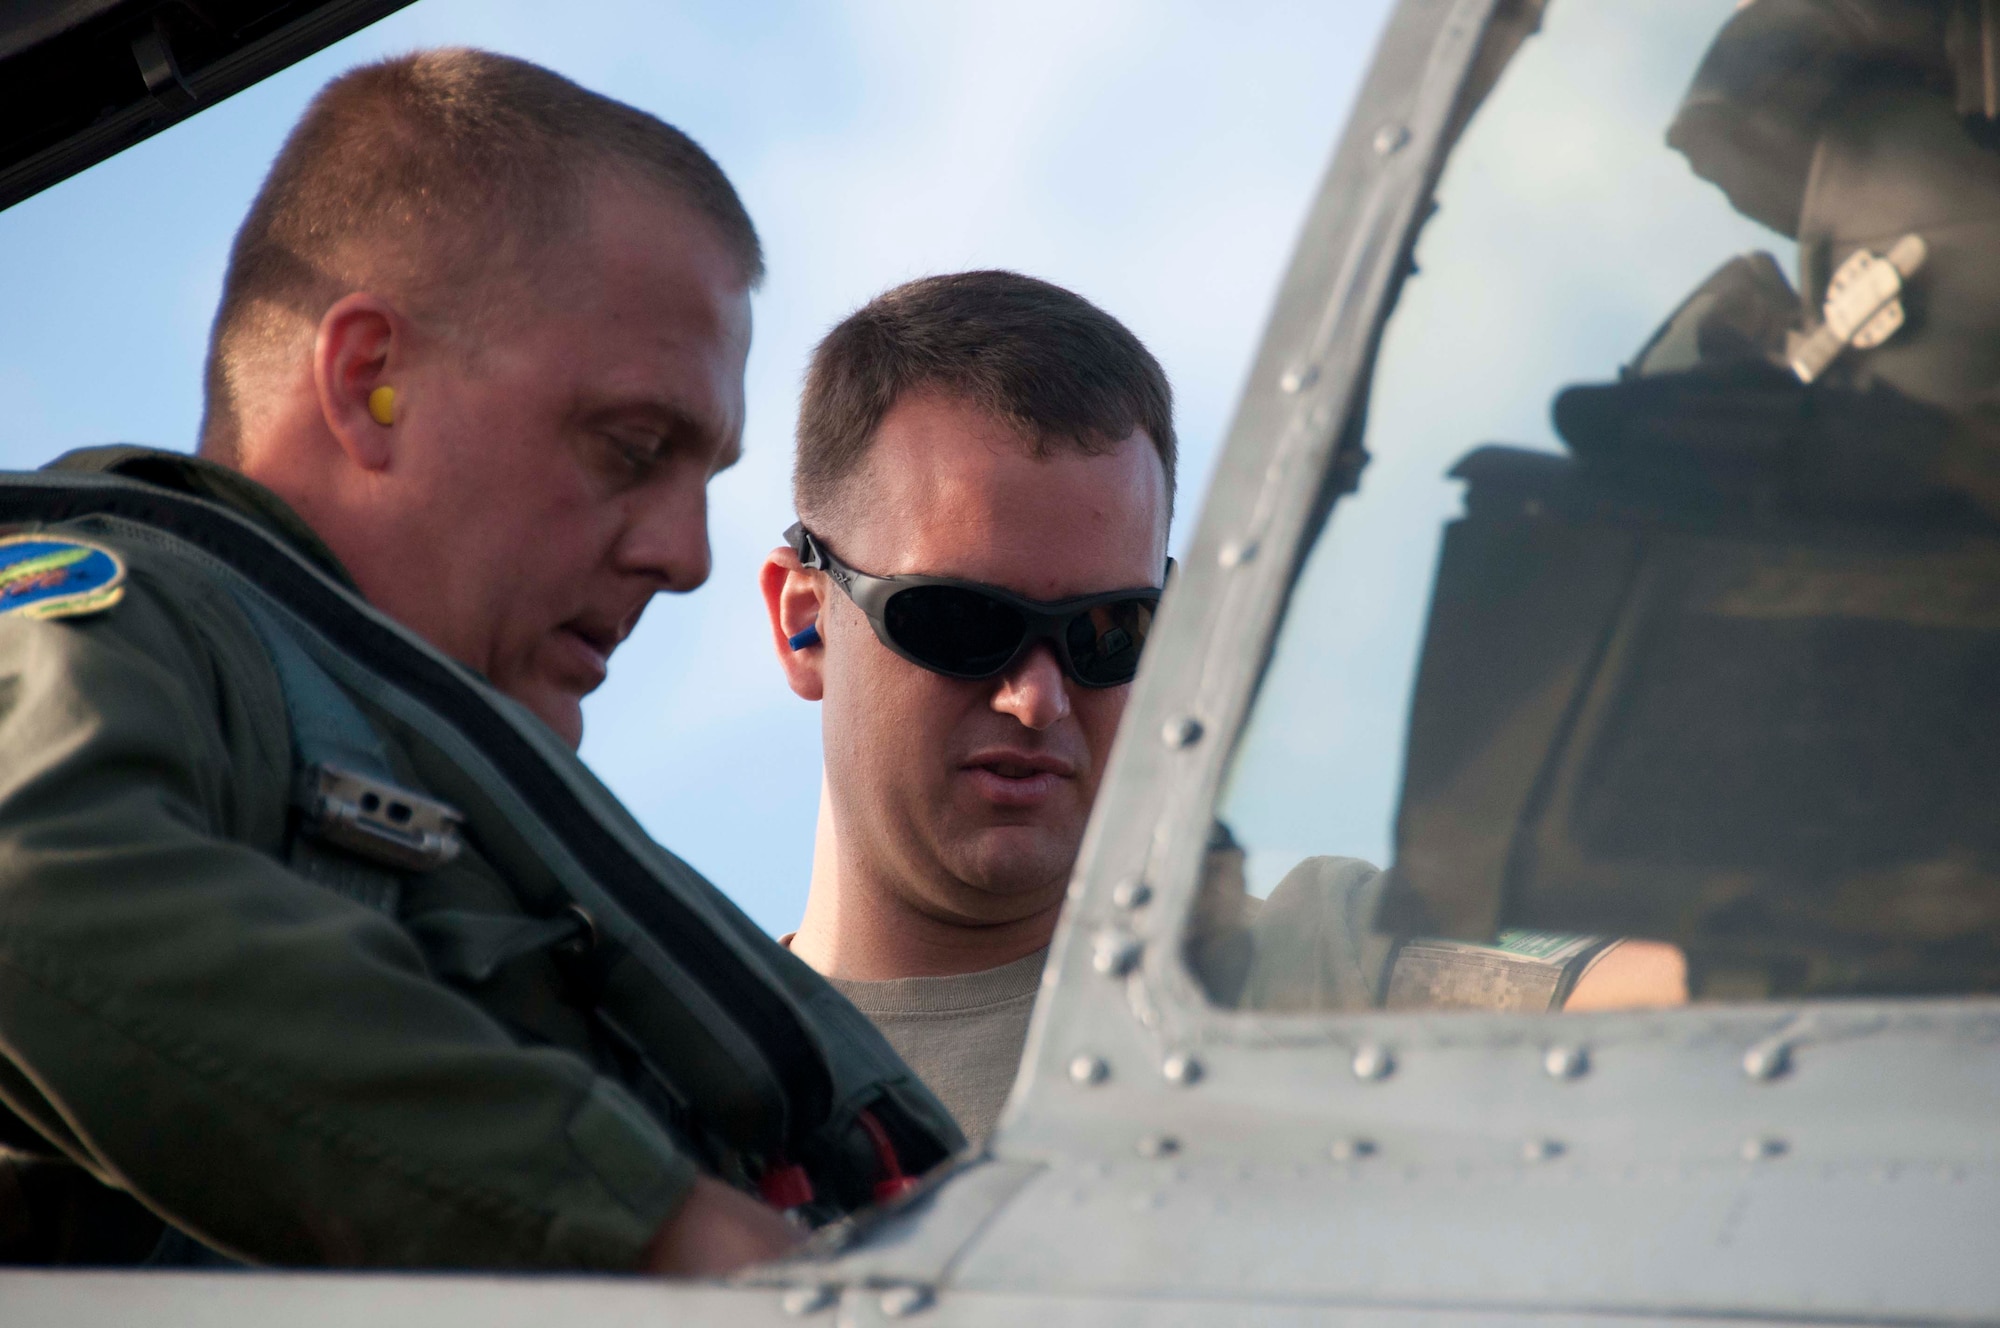 U.S Air Force Staff Sgt. Justin Browning, 917th Maintenance Squadron crew chief, works with U.S. Air Force Maj. Maury Kent, 47th Fighter Squadron, prior to a sortie during Rim of the Pacific exercise at Joint Base Pearl Harbor-Hickam, Hawaii, July 17,2012. Twenty-two nations, more than 40 ships and submarines, more than 200 aircraft and 25,000 personnel are participating in RIMPAC exercise from June 29 to Aug. 3, in and around the Hawaiian Islands. The world's largest international maritime exercise, RIMPAC provides a unique training opportunity that helps participants foster and sustain the cooperative relationships that are critical to ensuring the safety of sea lanes and security on the world's oceans. RIMPAC 2012 is the 23rd exercise in the series that began in 1971. (U.S. Air Force photo by Staff Sgt. Ted Daigle)